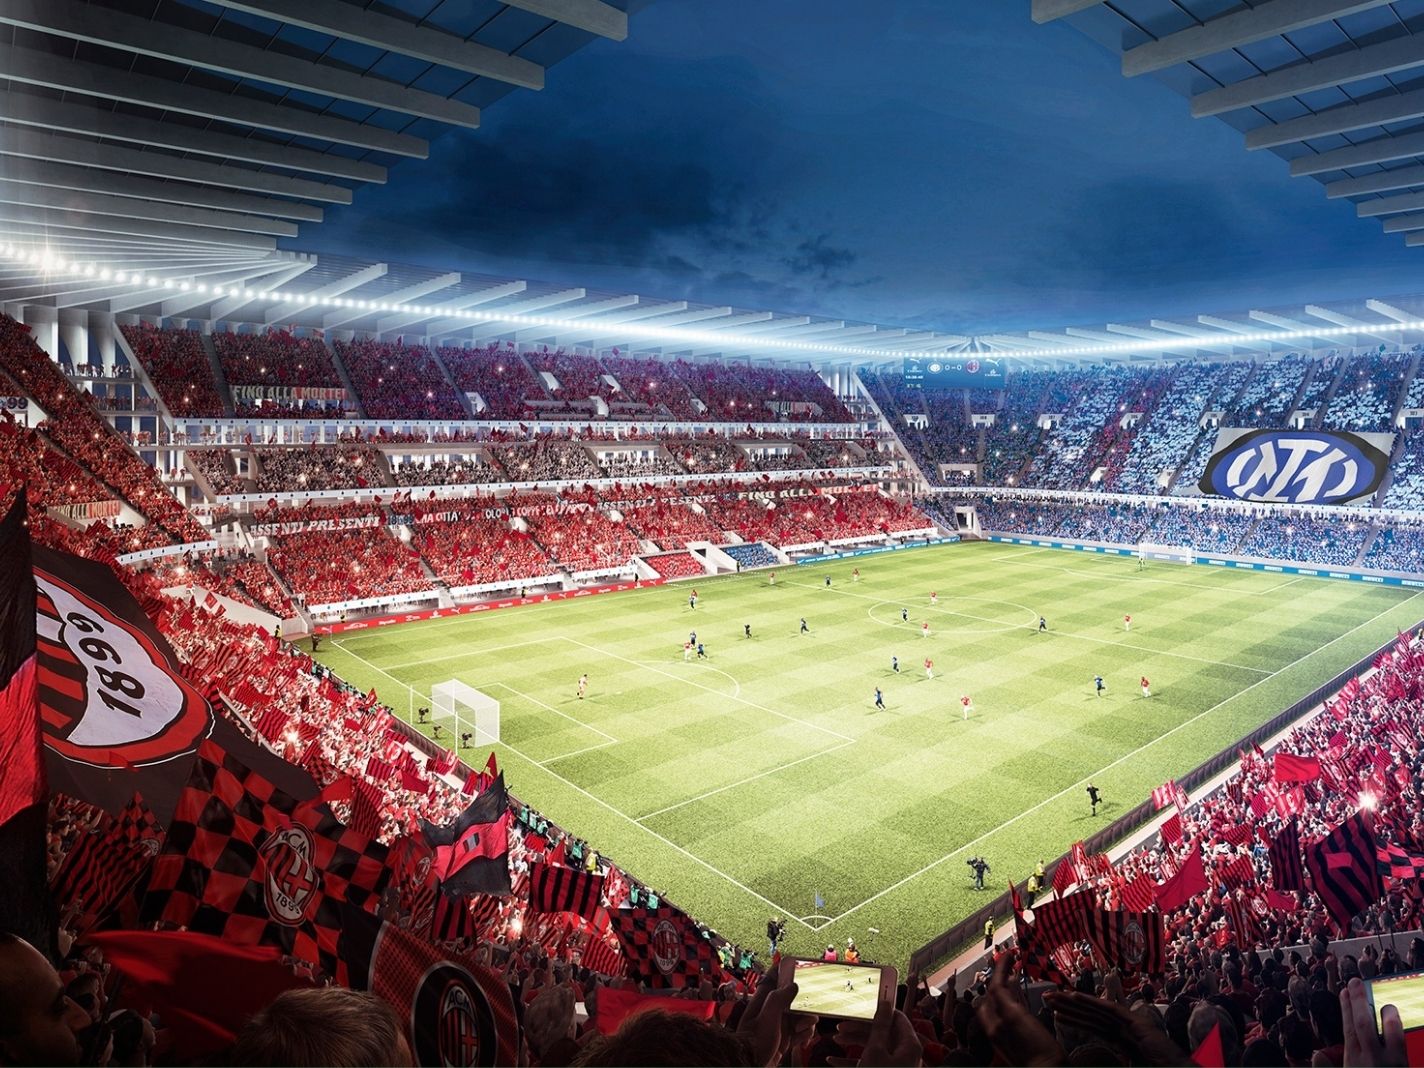 Concept design of the new AC Milan and Inter stadium which is going to replace San Siro